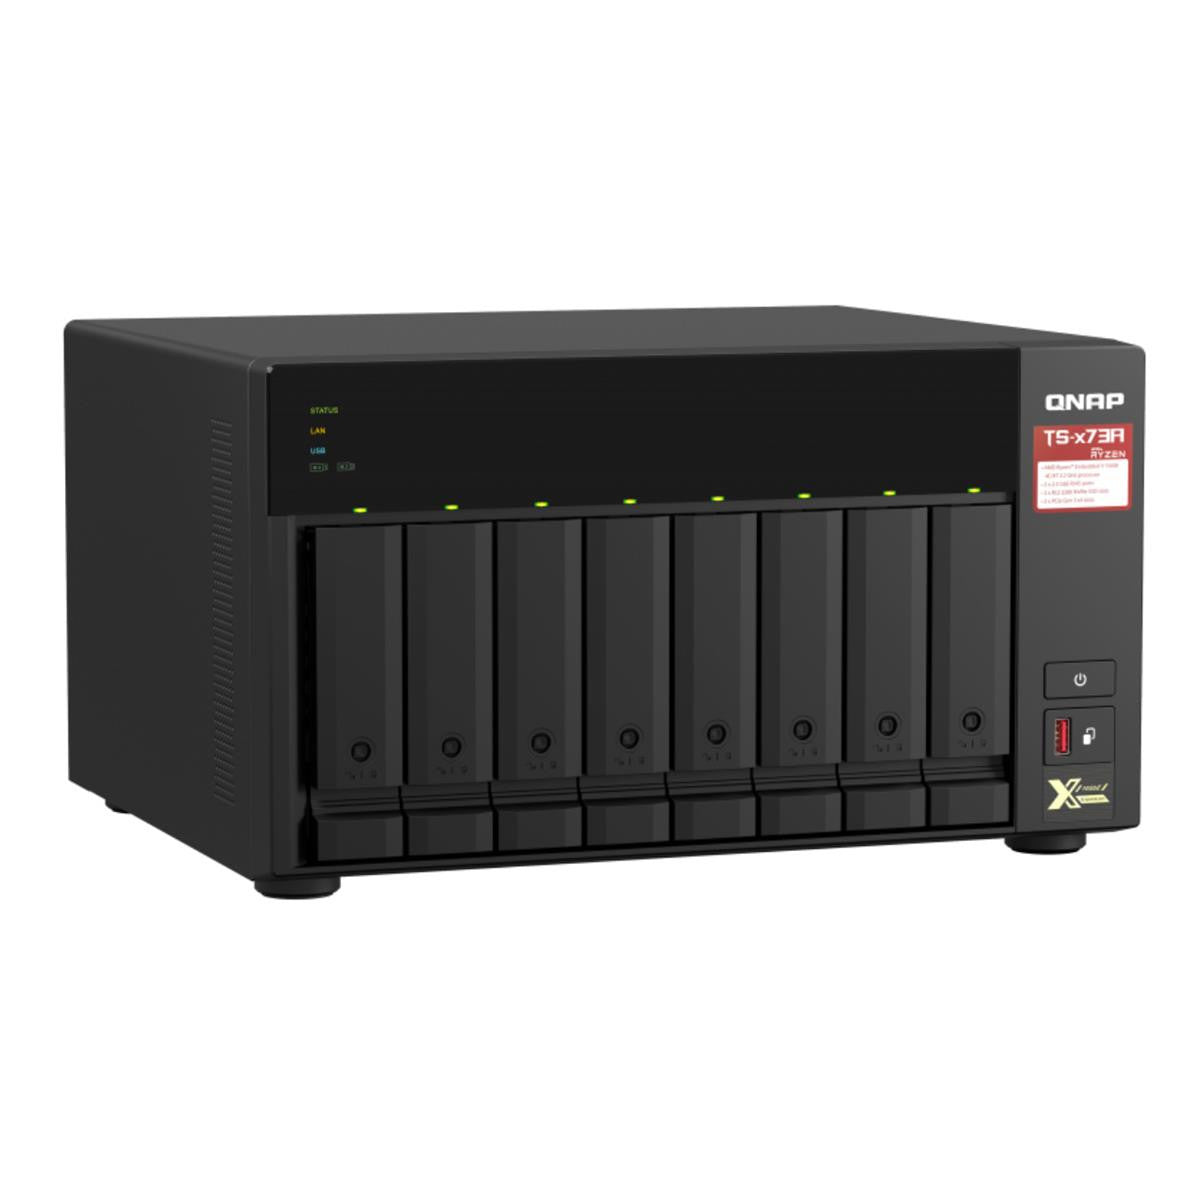 QNAP TS-873A 8-BAY NAS with 8GB DDR4 RAM and 96TB (8x12TB) Seagate Ironwolf NAS Drives Fully Assembled and Tested